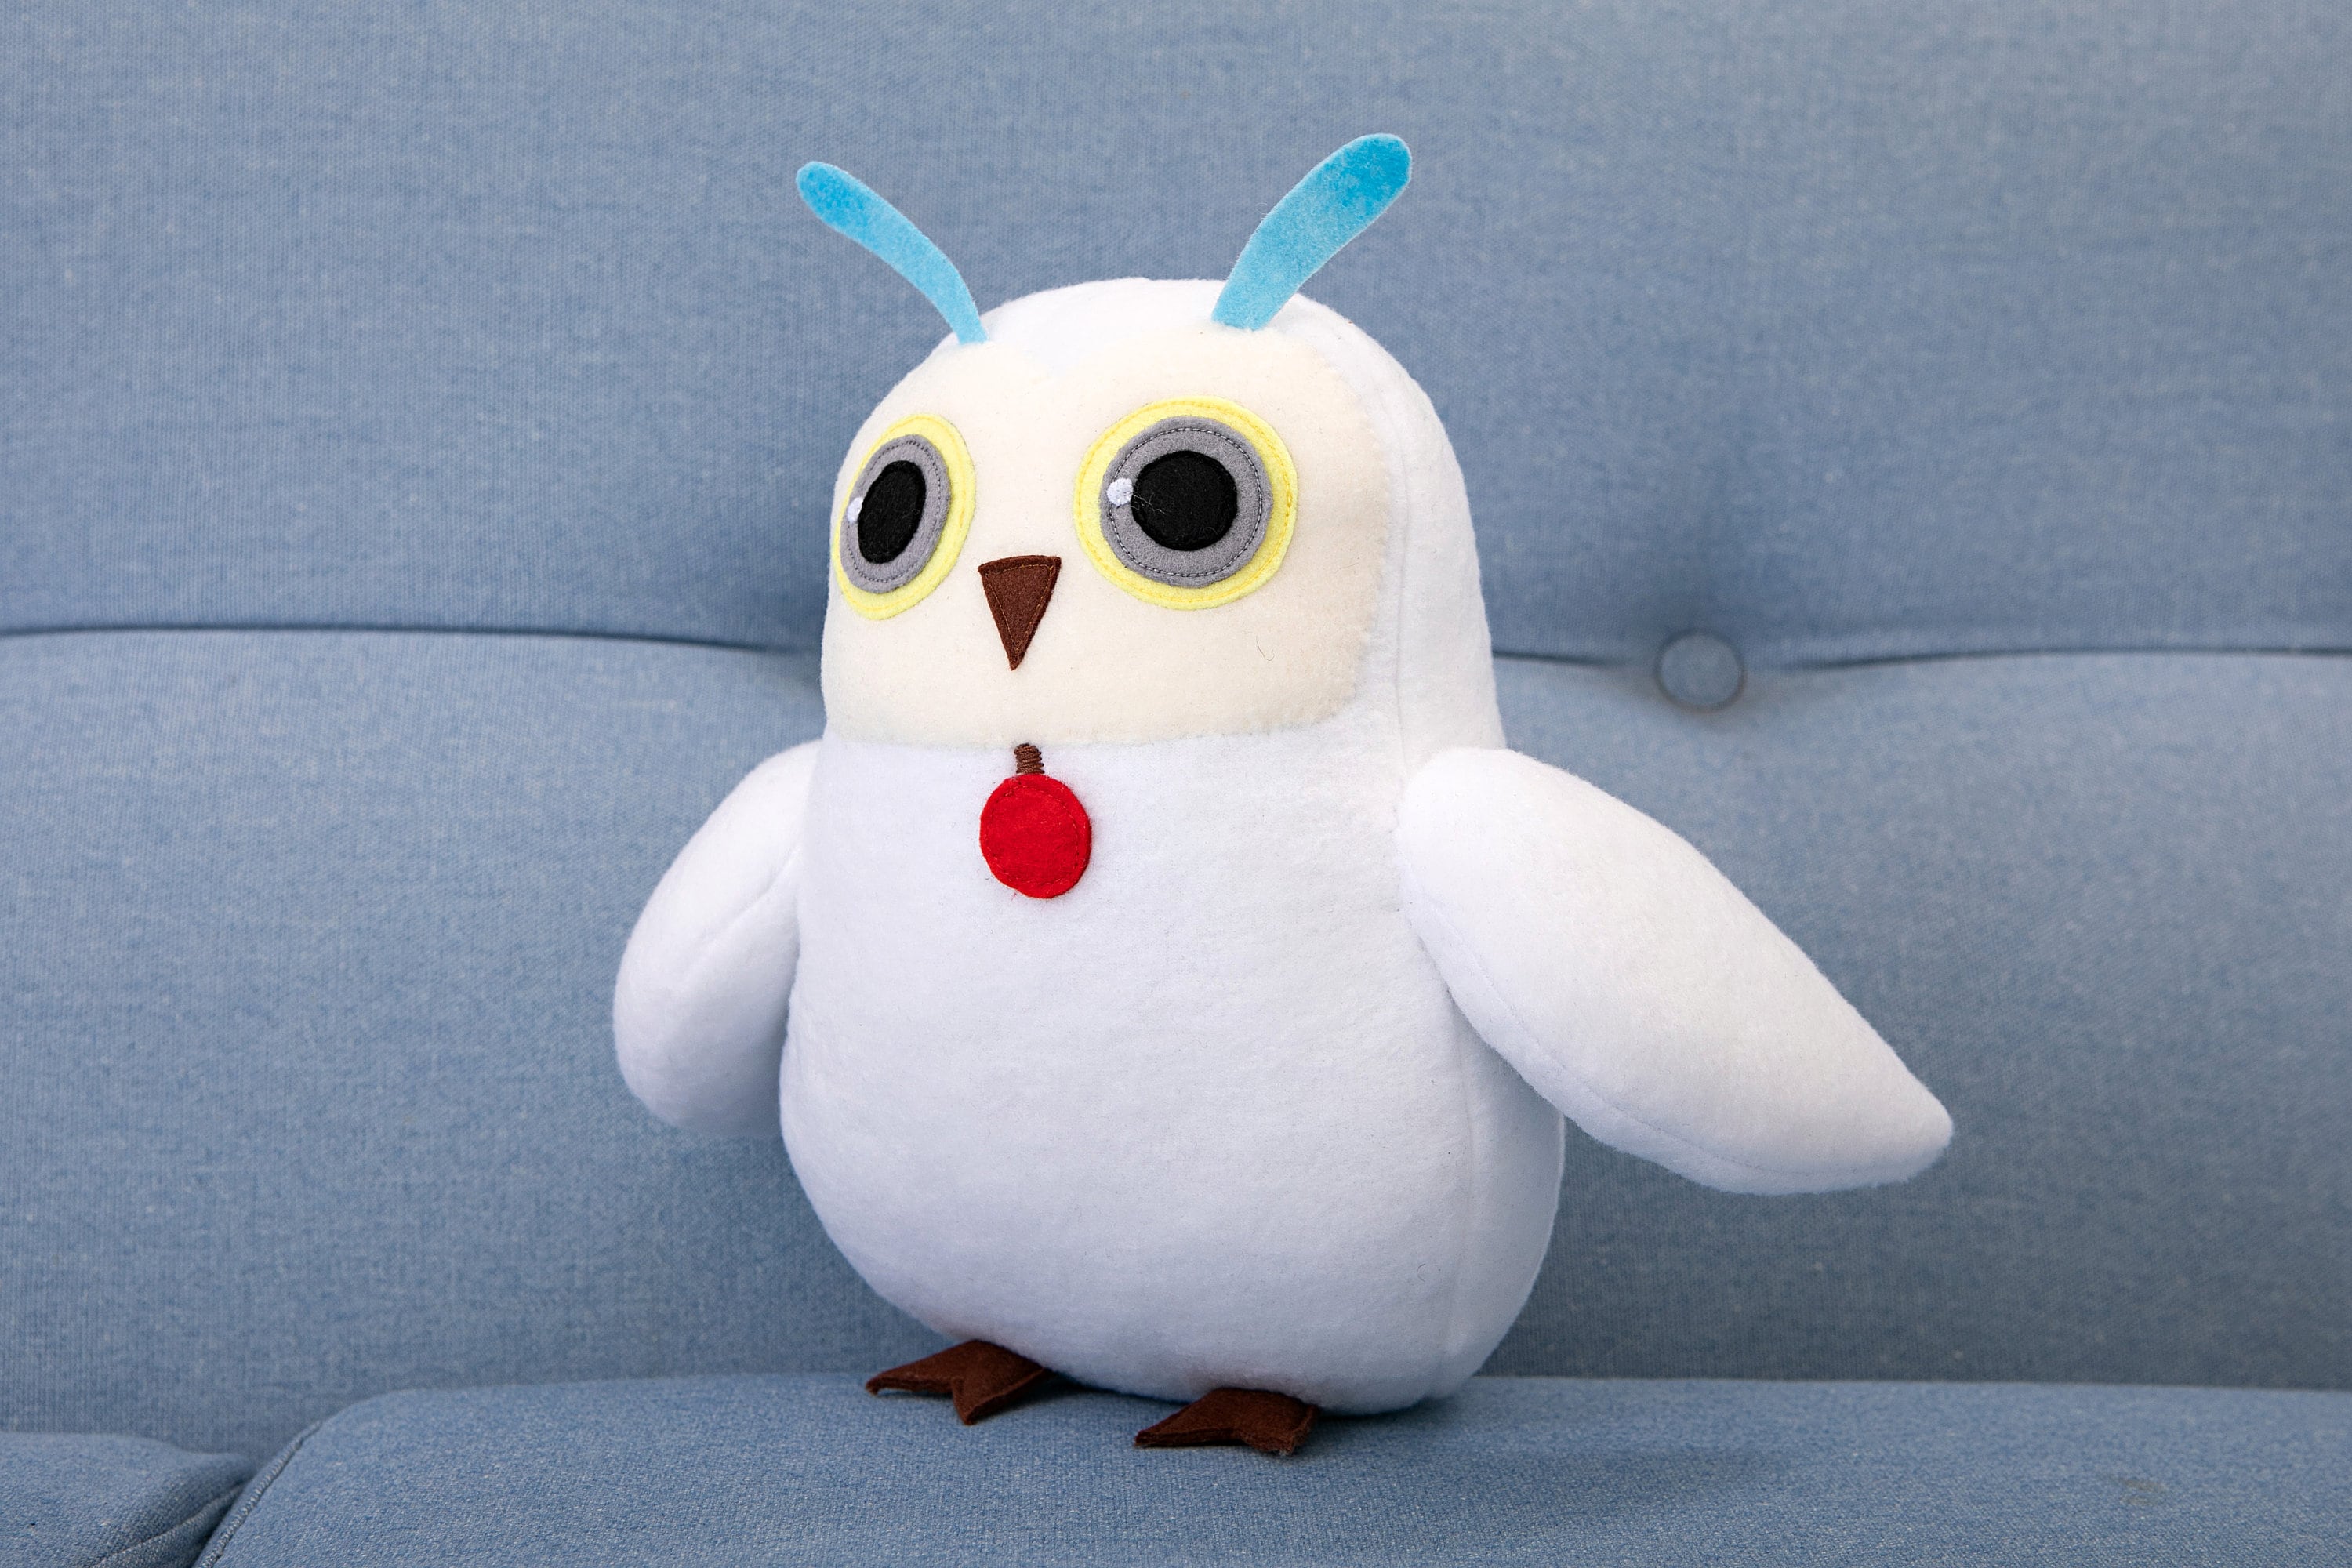 Tales Of Arise White Owl / Hootle / Fururu plushie - Handmade soft decoration - 7 in - Made to order